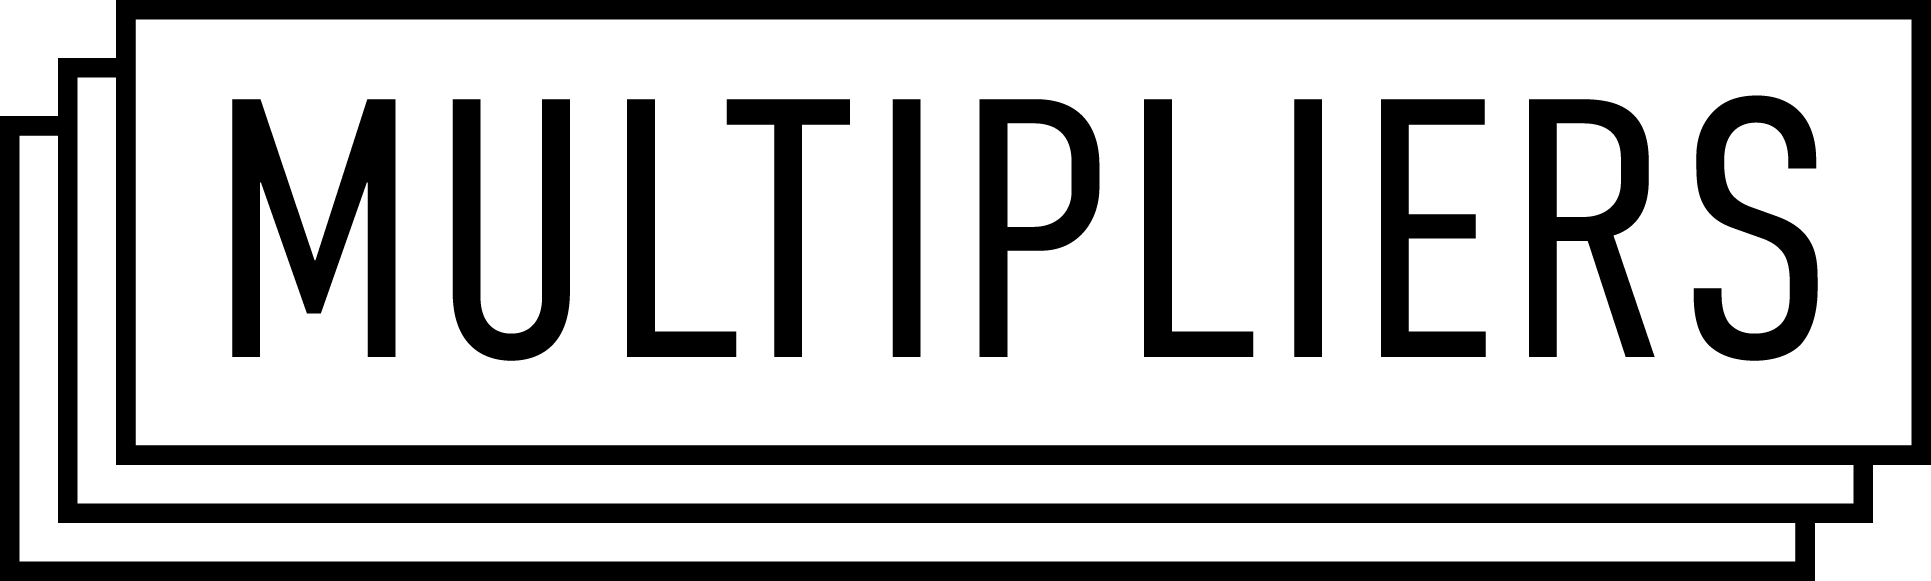 Black text reading 'multipliers' with a black rectangular outline around it.